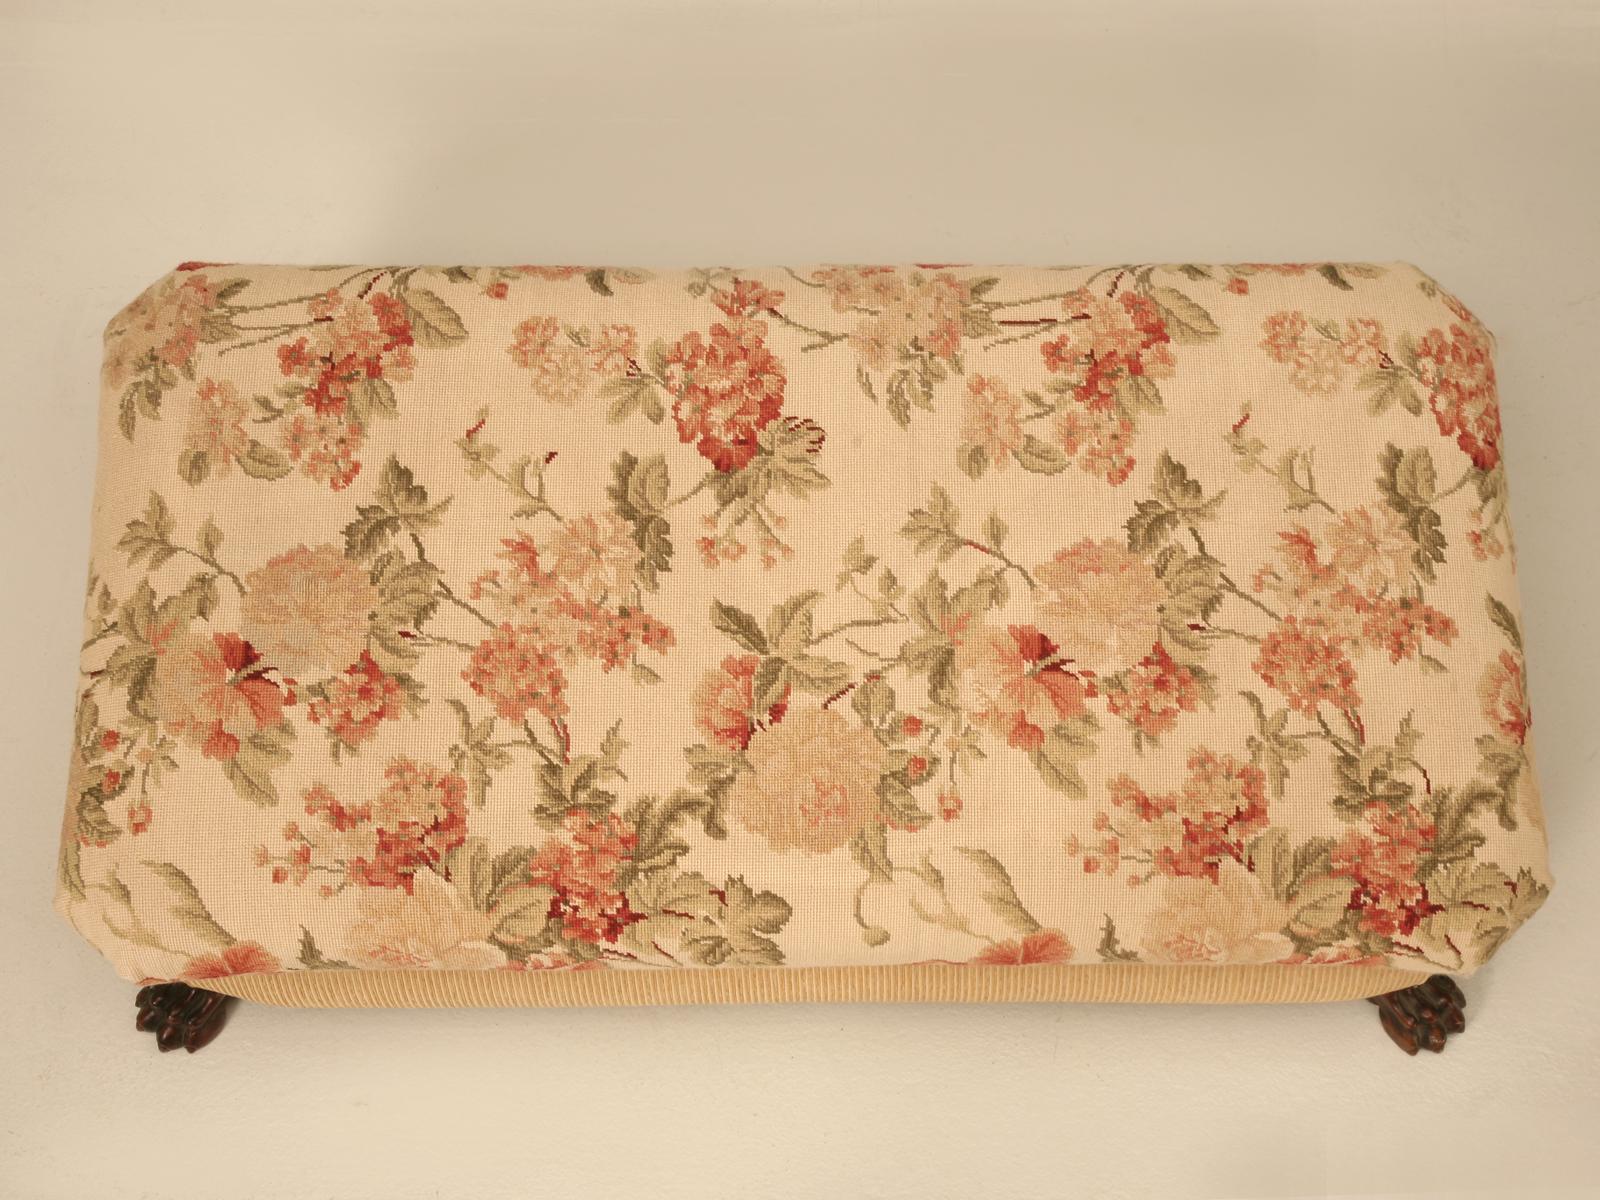 Ottoman, handmade in England.
Large rectangular ottoman with lion claw feet, with exquisite needlepoint upholstery. Perfectly suited to use as a coffee table in front of the sofa without worrying about putting your feet up. Top lifts to reveal